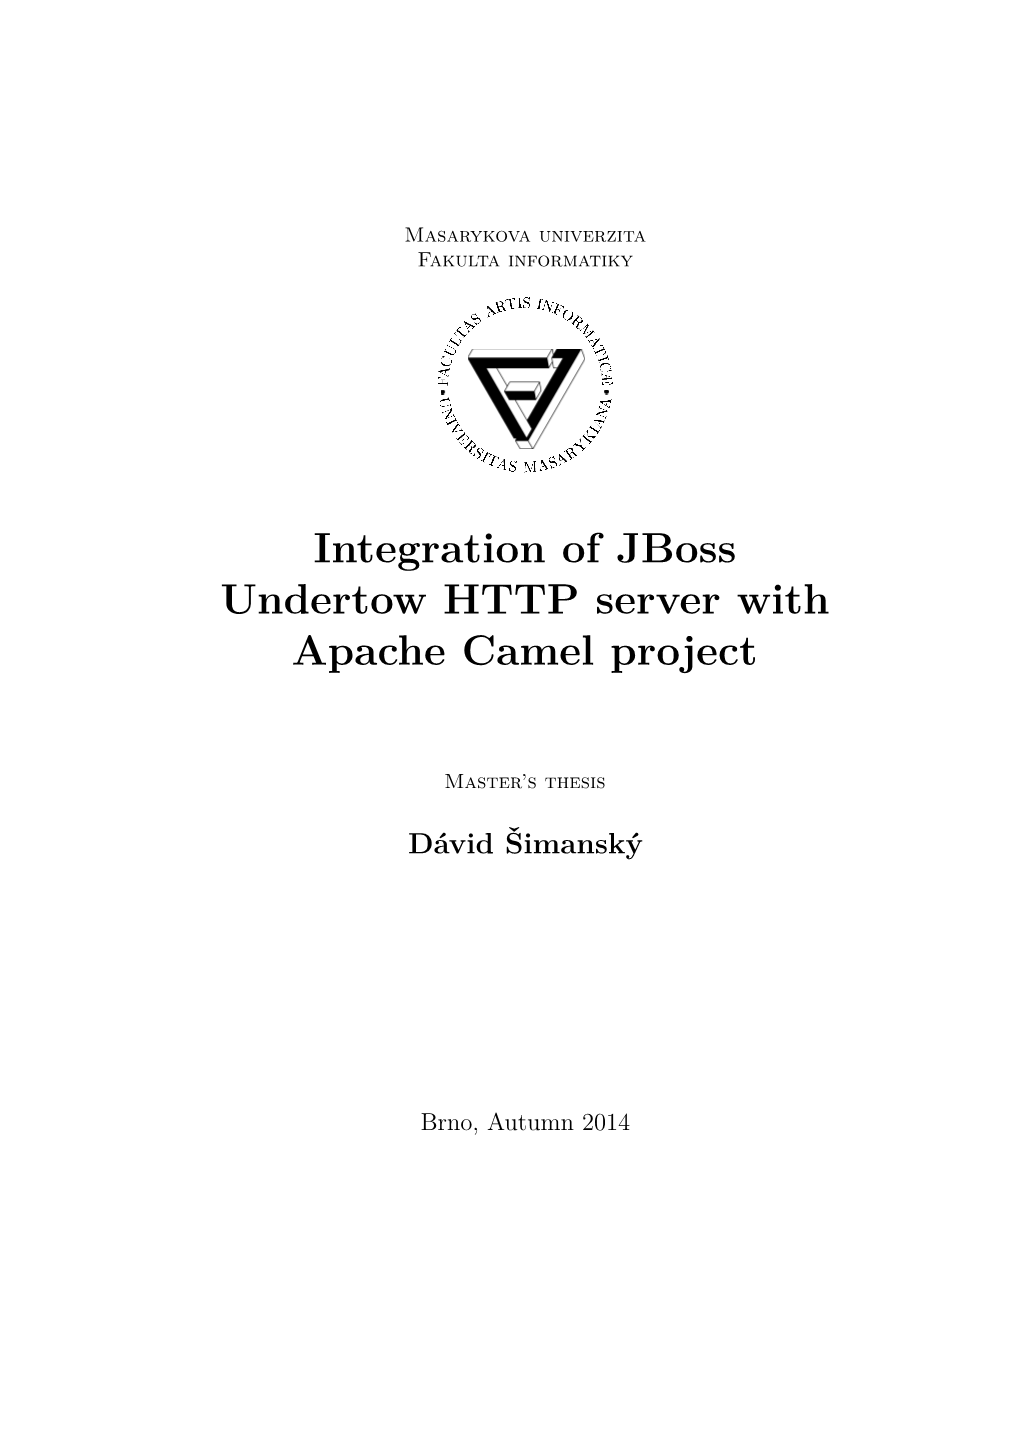 Integration of Jboss Undertow HTTP Server with Apache Camel Project